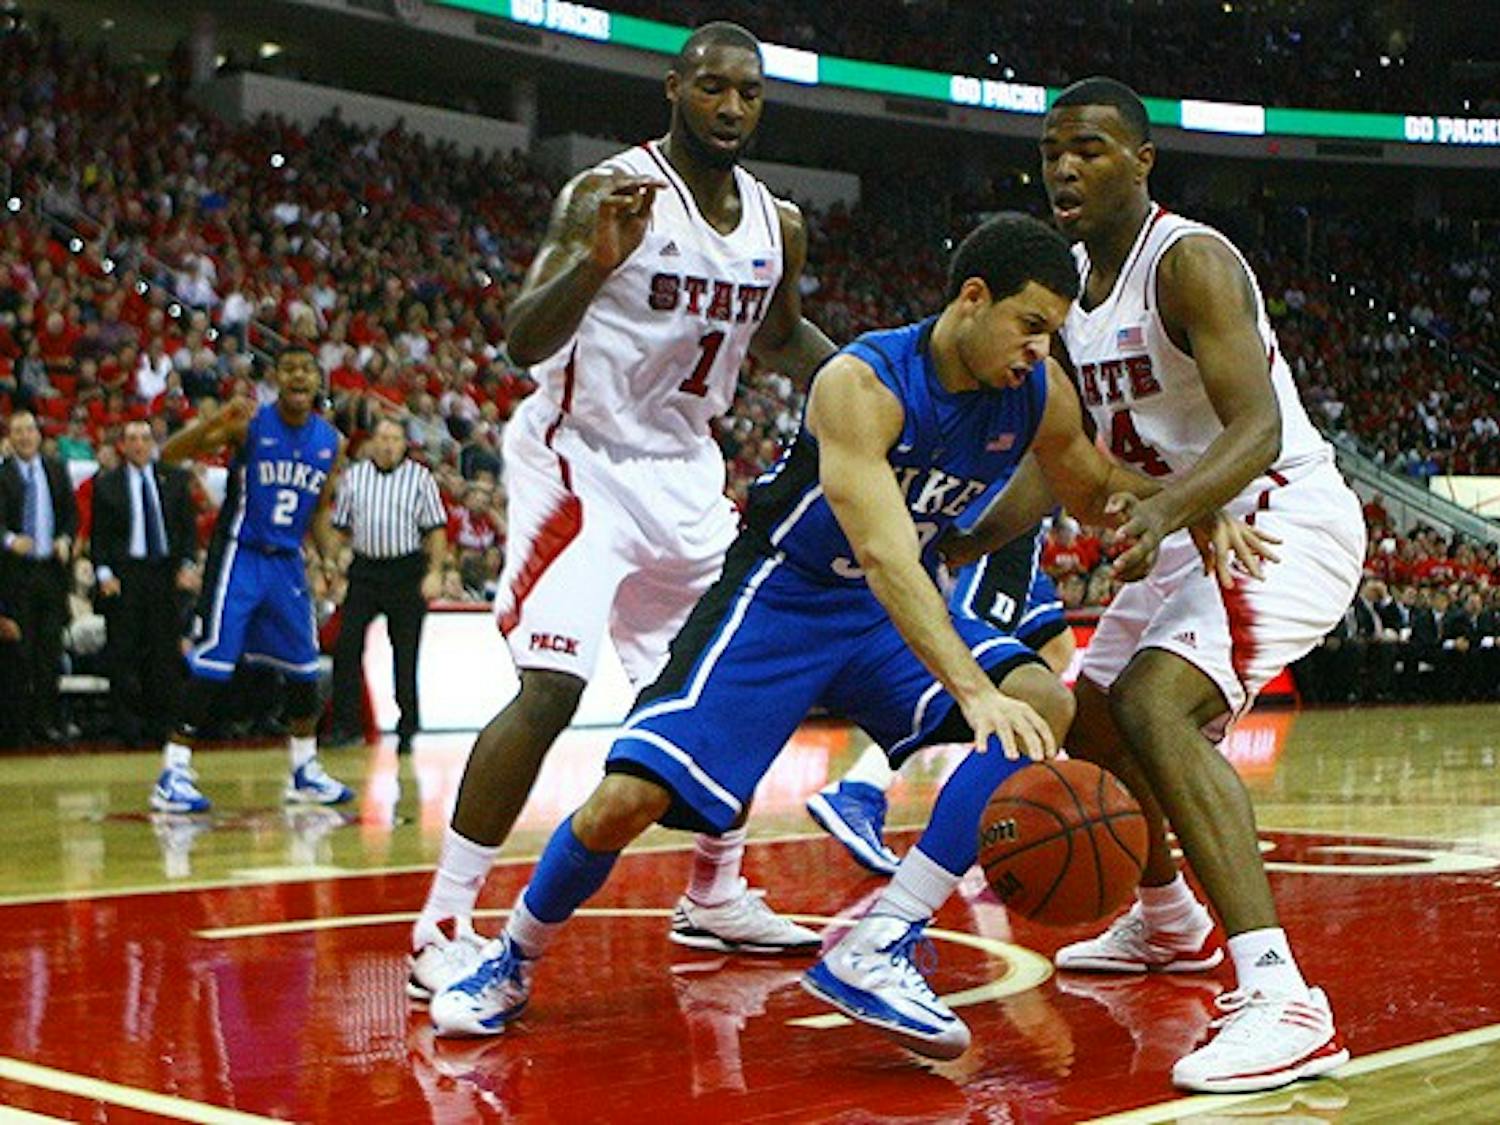 Seth Curry was injured on Saturday, but will play Thursday against the Yellow Jackets.